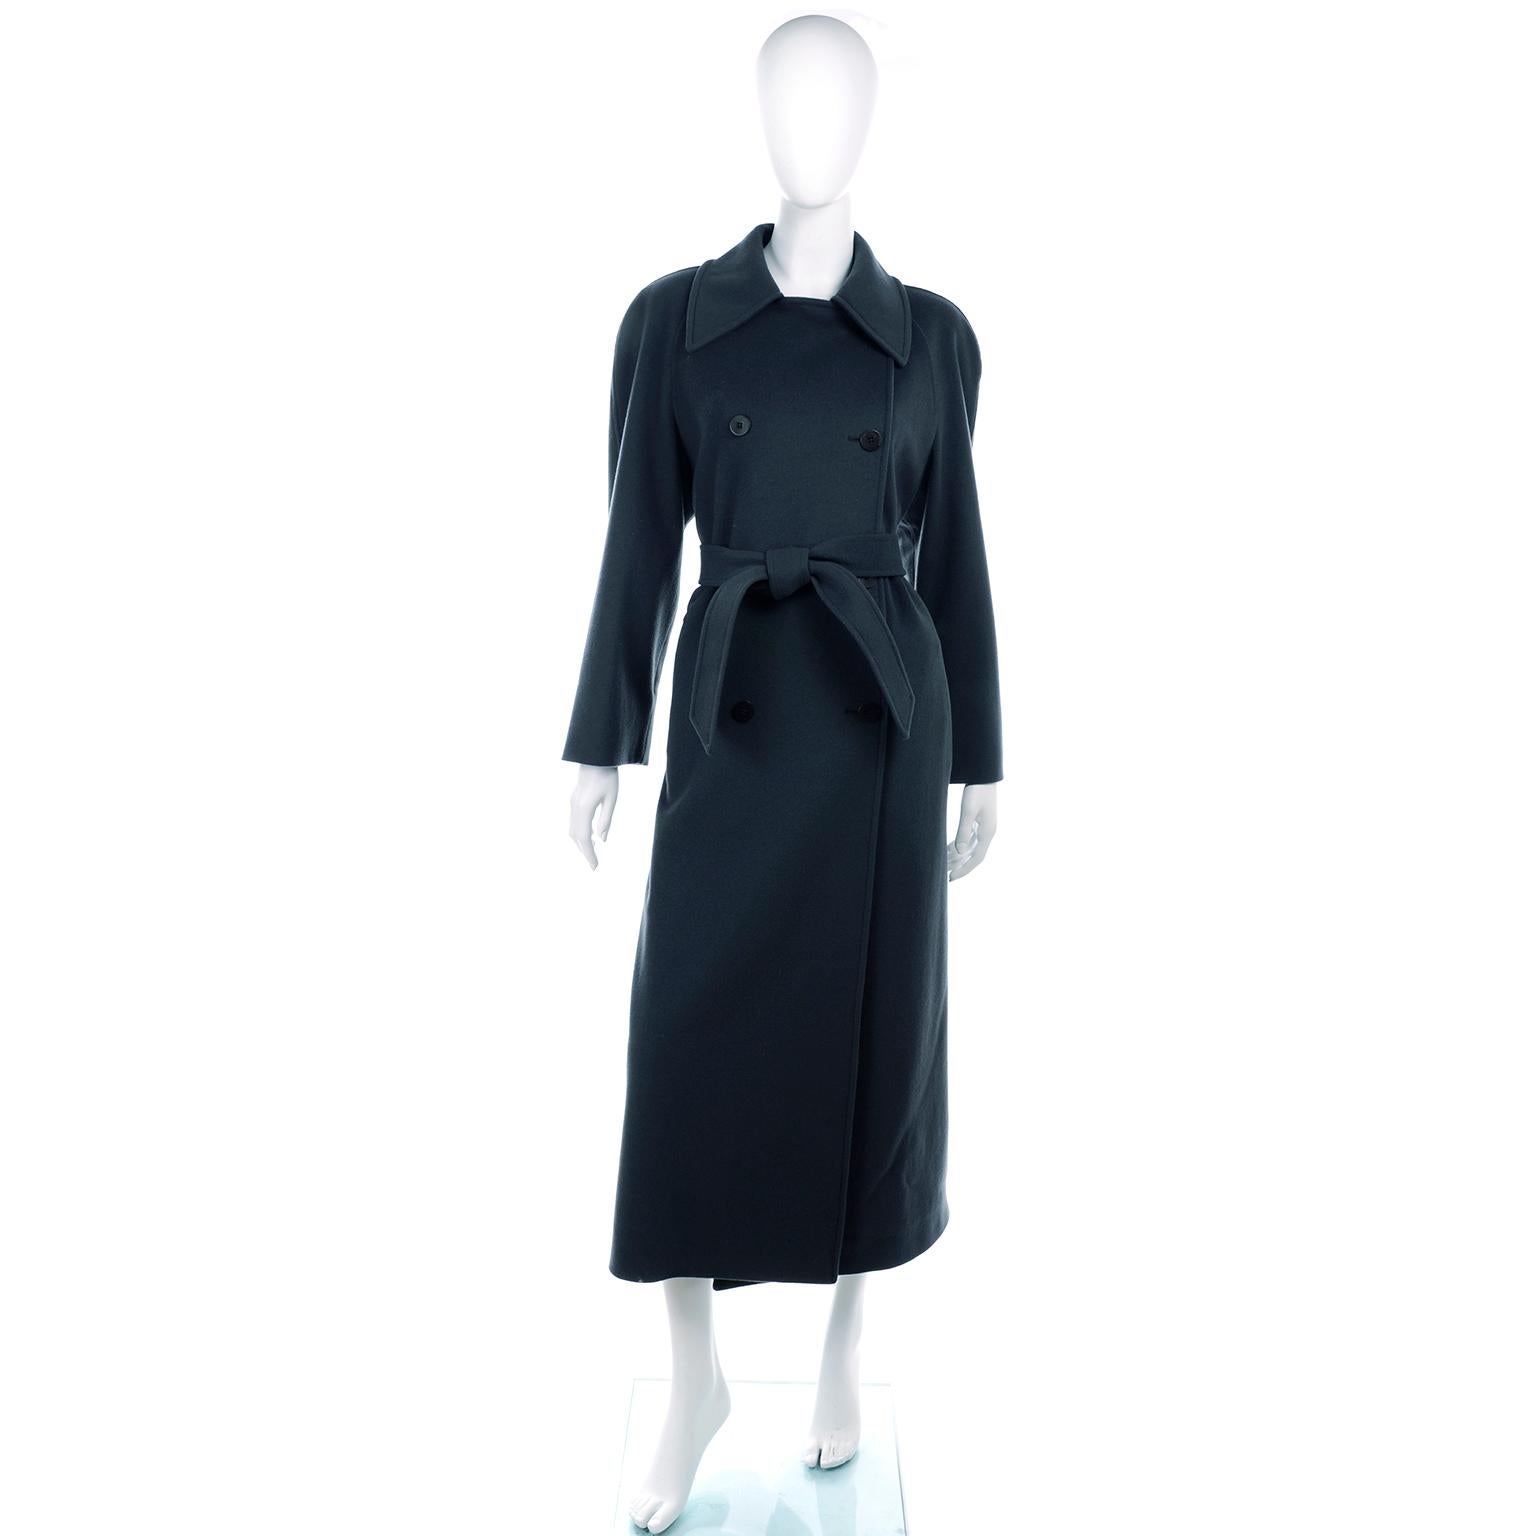 This is a beautiful Giorgio Armani Le Collezioni pure wool double breasted vintage coat with belt. The wool fabric is a deep green/gray and the coat is full lined. Perfect for cold weather, this coat has a wonderful weight to it. 

This lovely coat